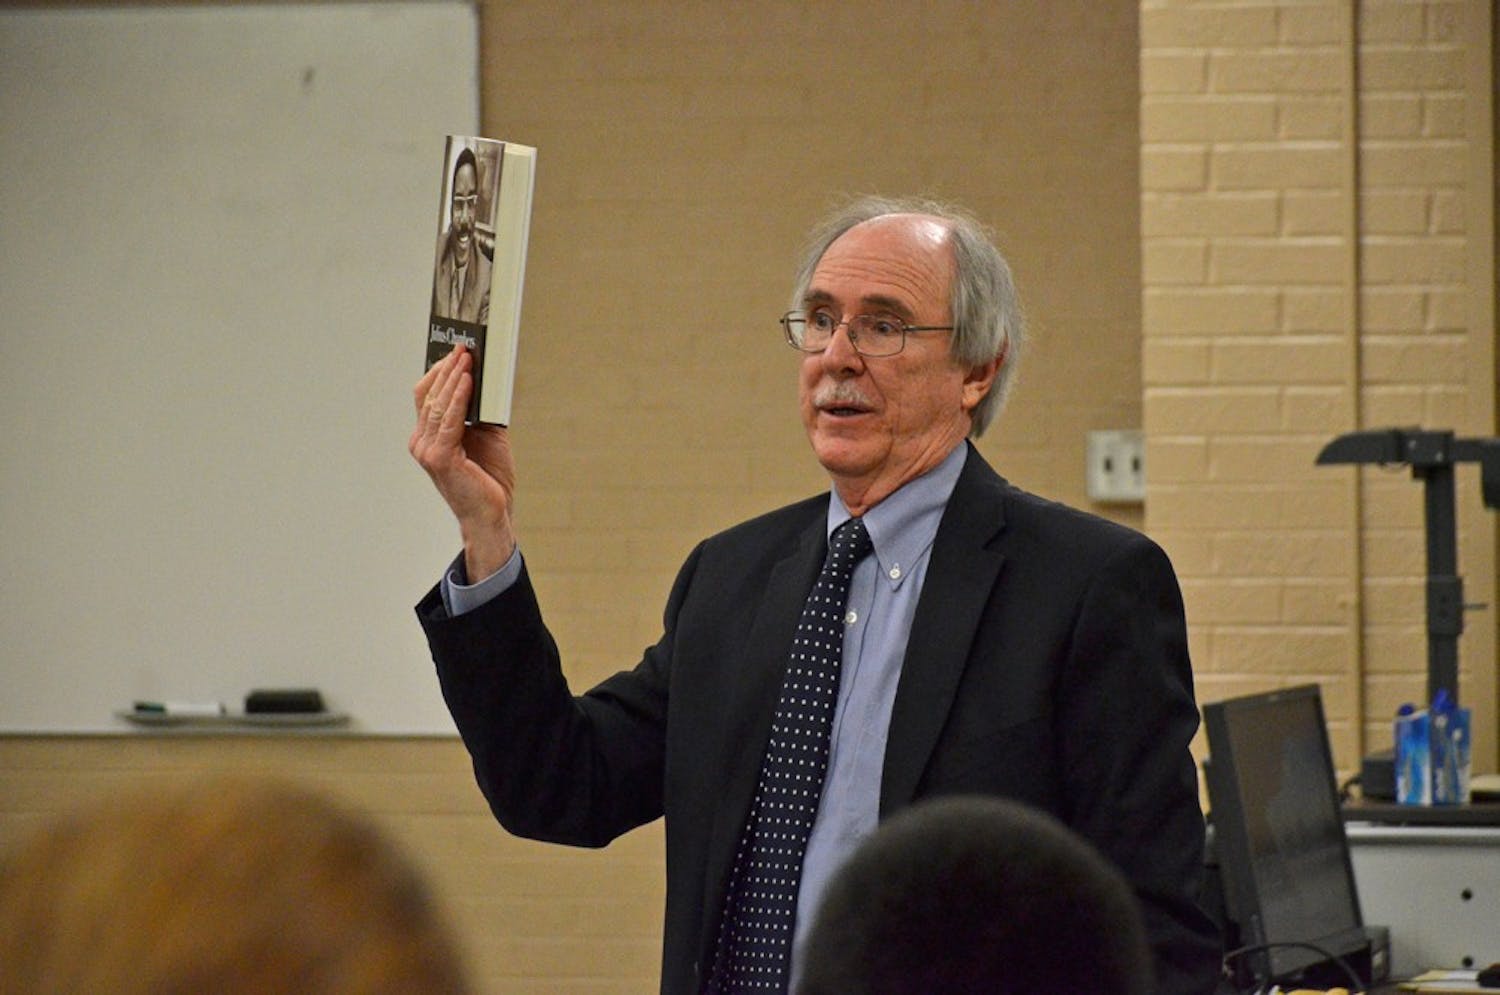 Previous UNC Law School dean John Charles Boger presents an analysis of Julius Chambers' book at a two part event on civil rights at the UNC Law School.